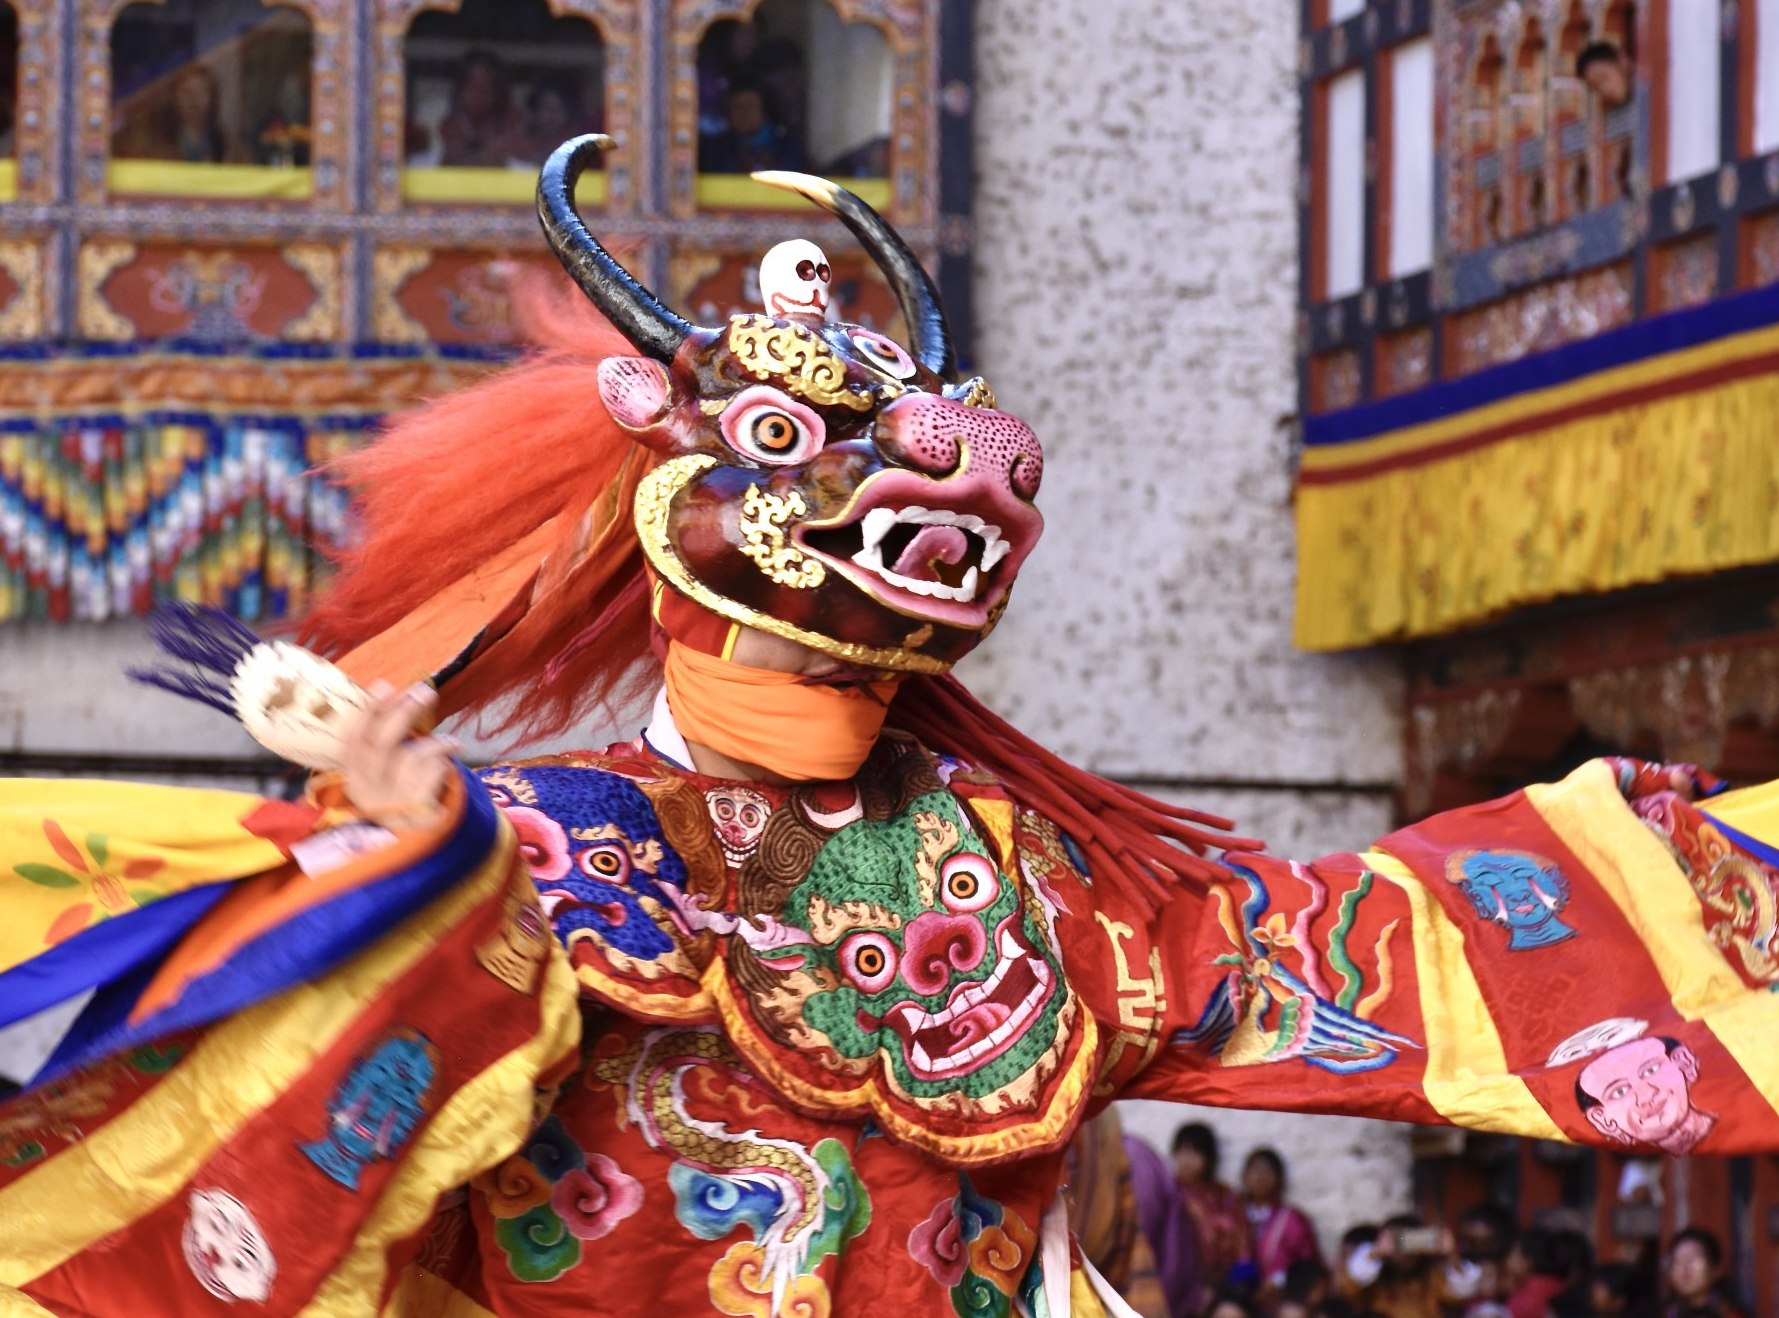 Know What to Expect at a Buddhist Tshechu Festival in Bhutan Behind